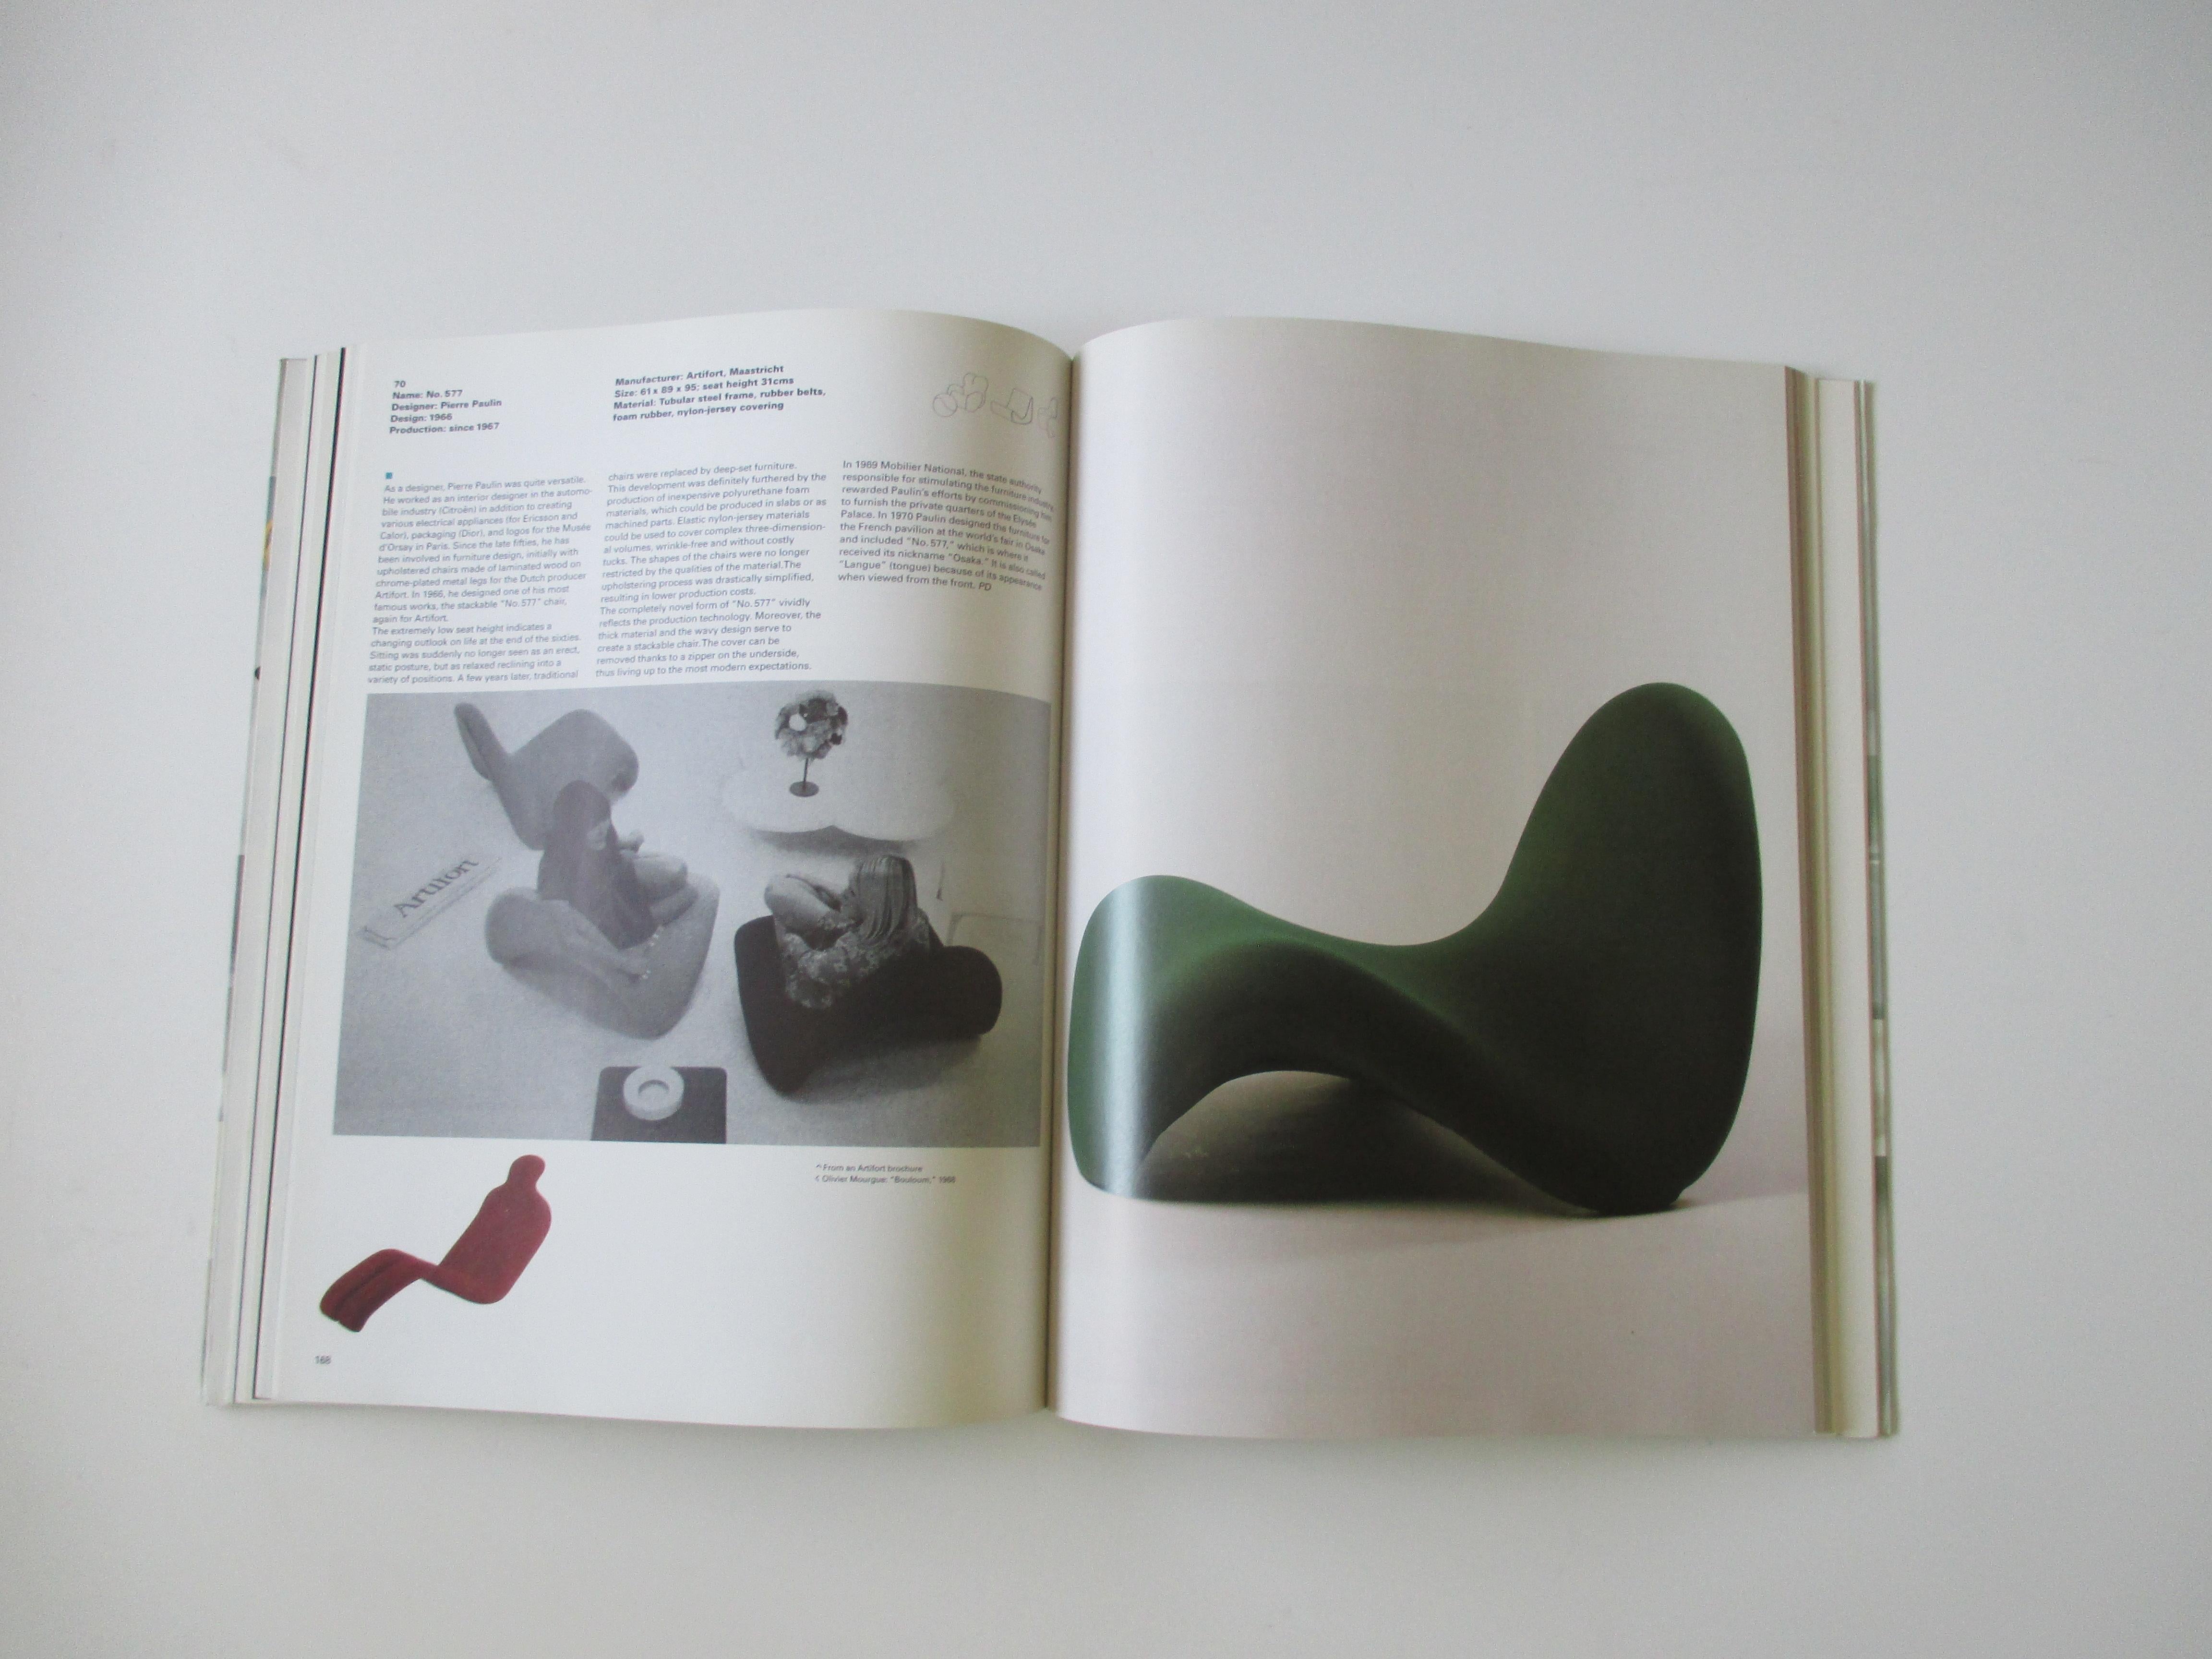 North American 100 Masterpieces from the Vitra Design Museum Collection